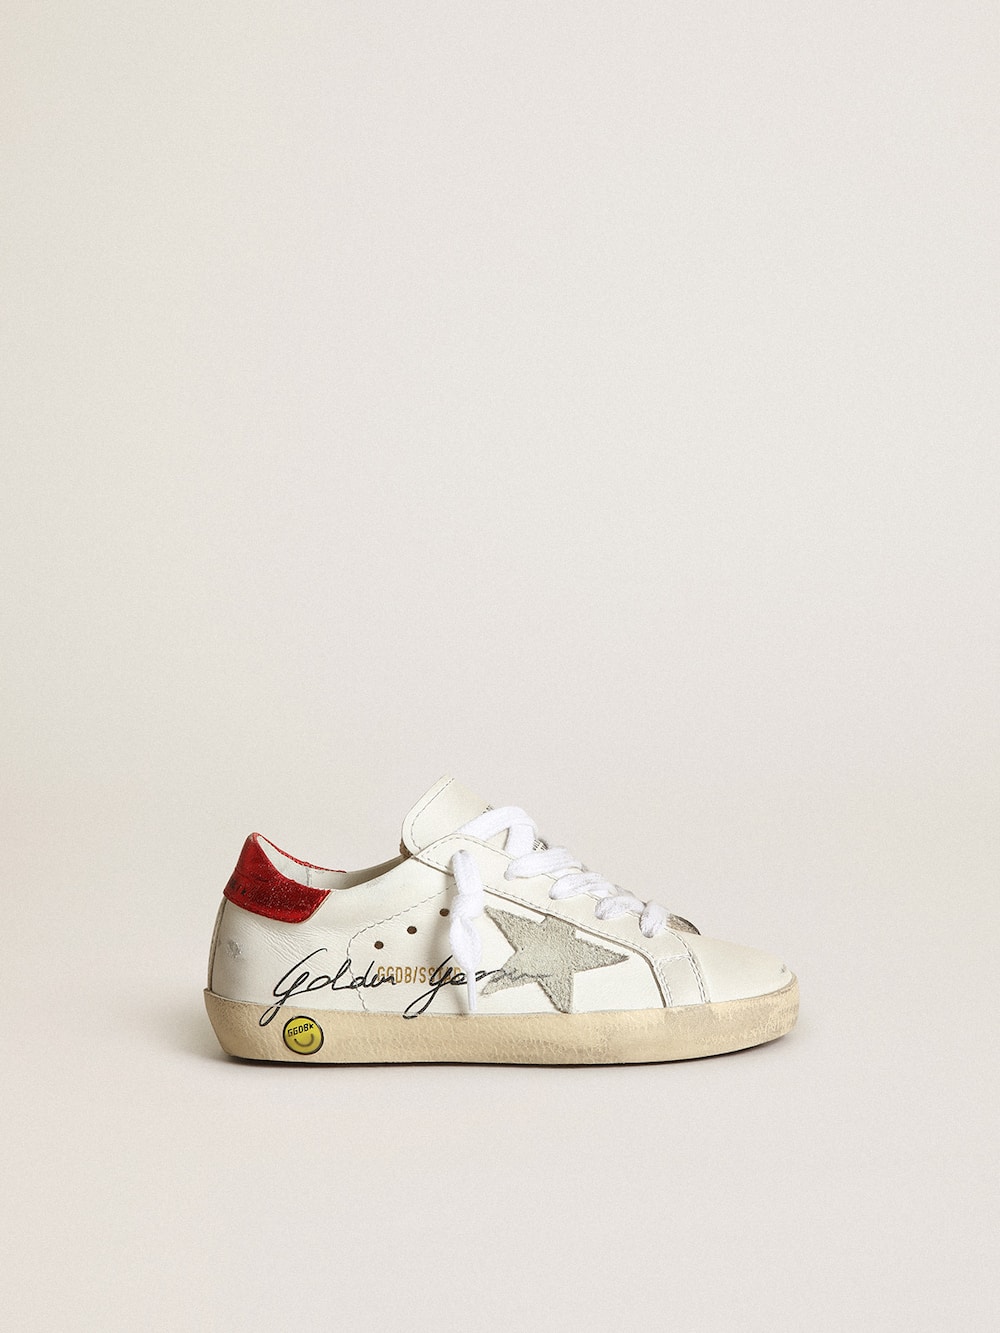 Golden Goose - Junior Super-Star with gray star and red heel tab in 